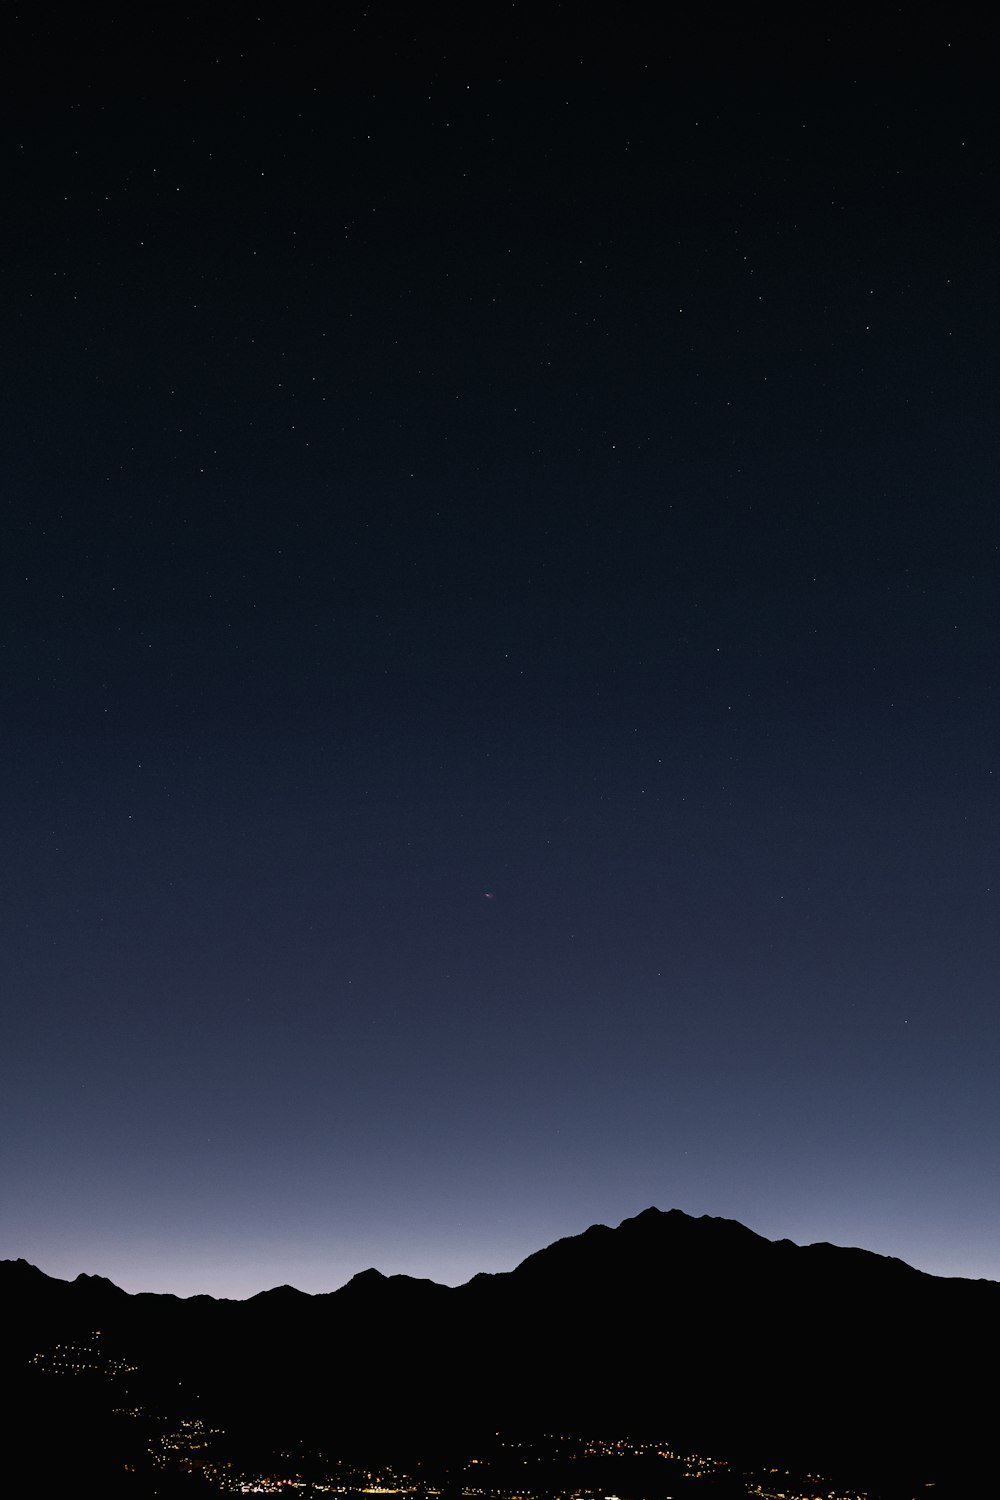 a view of the night sky with a mountain in the background